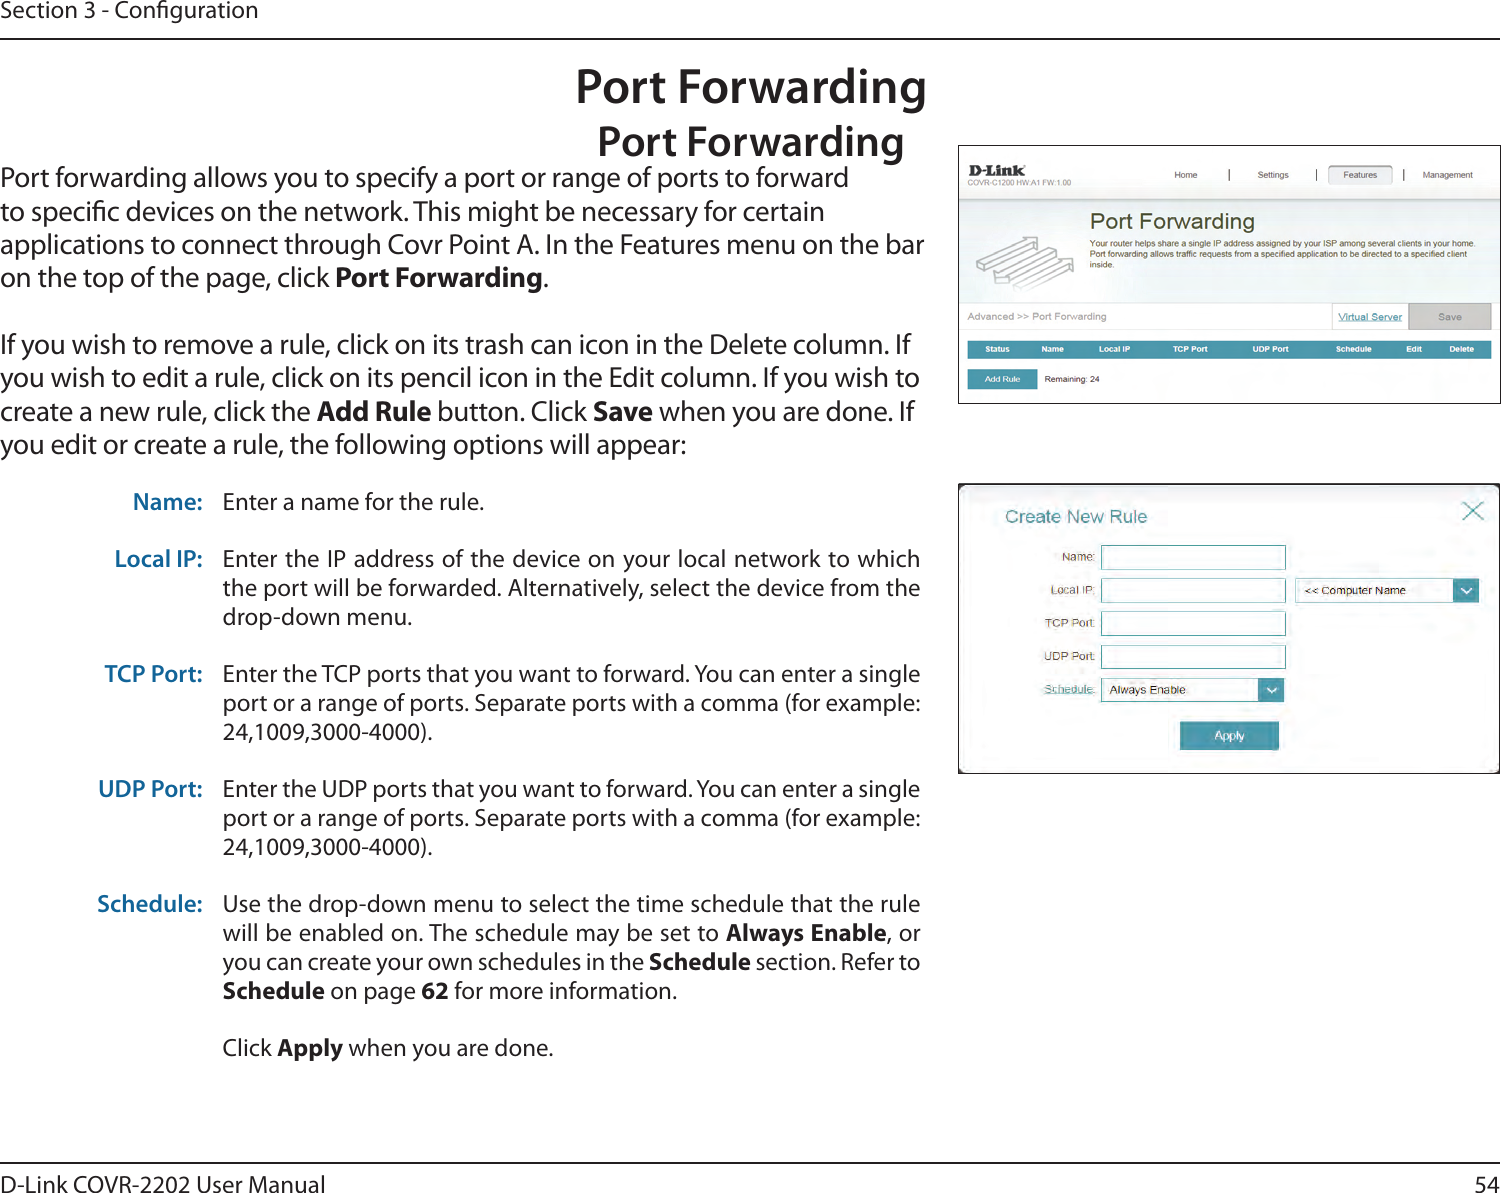 54D-Link COVR-2202 User ManualSection 3 - CongurationPort ForwardingPort ForwardingPort forwarding allows you to specify a port or range of ports to forward to specic devices on the network. This might be necessary for certain applications to connect through Covr Point A. In the Features menu on the bar on the top of the page, click Port Forwarding.If you wish to remove a rule, click on its trash can icon in the Delete column. If you wish to edit a rule, click on its pencil icon in the Edit column. If you wish to create a new rule, click the Add Rule button. Click Save when you are done. If you edit or create a rule, the following options will appear:Name: Enter a name for the rule.Local IP: Enter the IP address of the device on your local network to which the port will be forwarded. Alternatively, select the device from the drop-down menu.TCP Port: Enter the TCP ports that you want to forward. You can enter a single port or a range of ports. Separate ports with a comma (for example: 24,1009,3000-4000).UDP Port: Enter the UDP ports that you want to forward. You can enter a single port or a range of ports. Separate ports with a comma (for example: 24,1009,3000-4000).Schedule: Use the drop-down menu to select the time schedule that the rule will be enabled on. The schedule may be set to Always Enable, or you can create your own schedules in the Schedule section. Refer to Schedule on page 62 for more information.Click Apply when you are done.